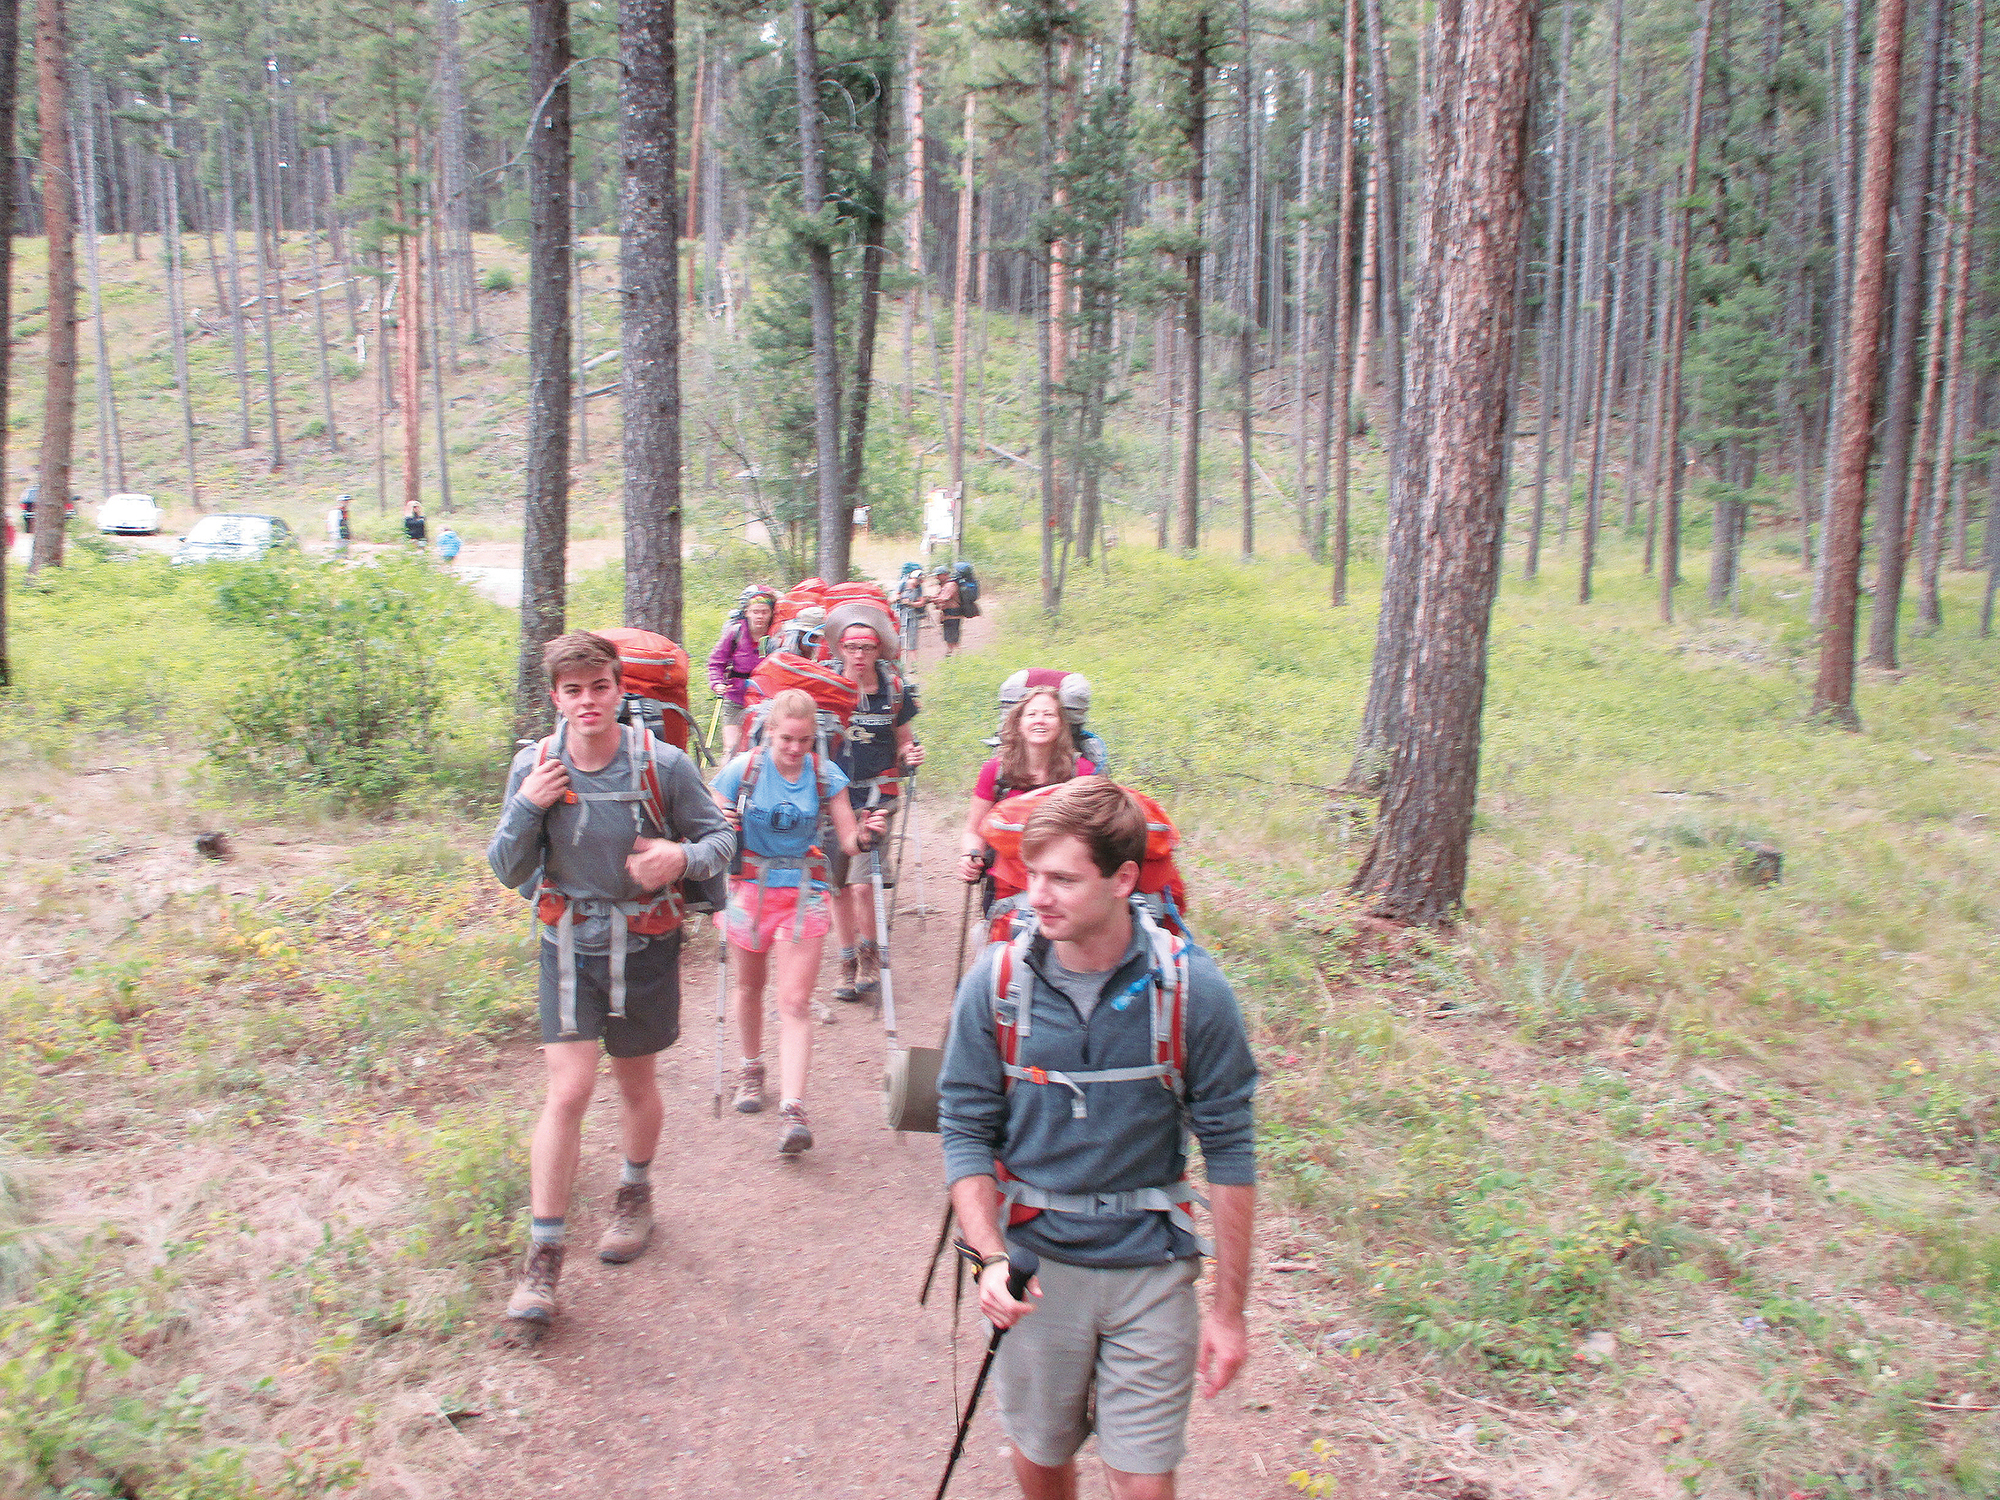 Associate Professor Mary Lynn Realff (right, second from front) steps out with students for a wilderness trek in Montana back in 2015.